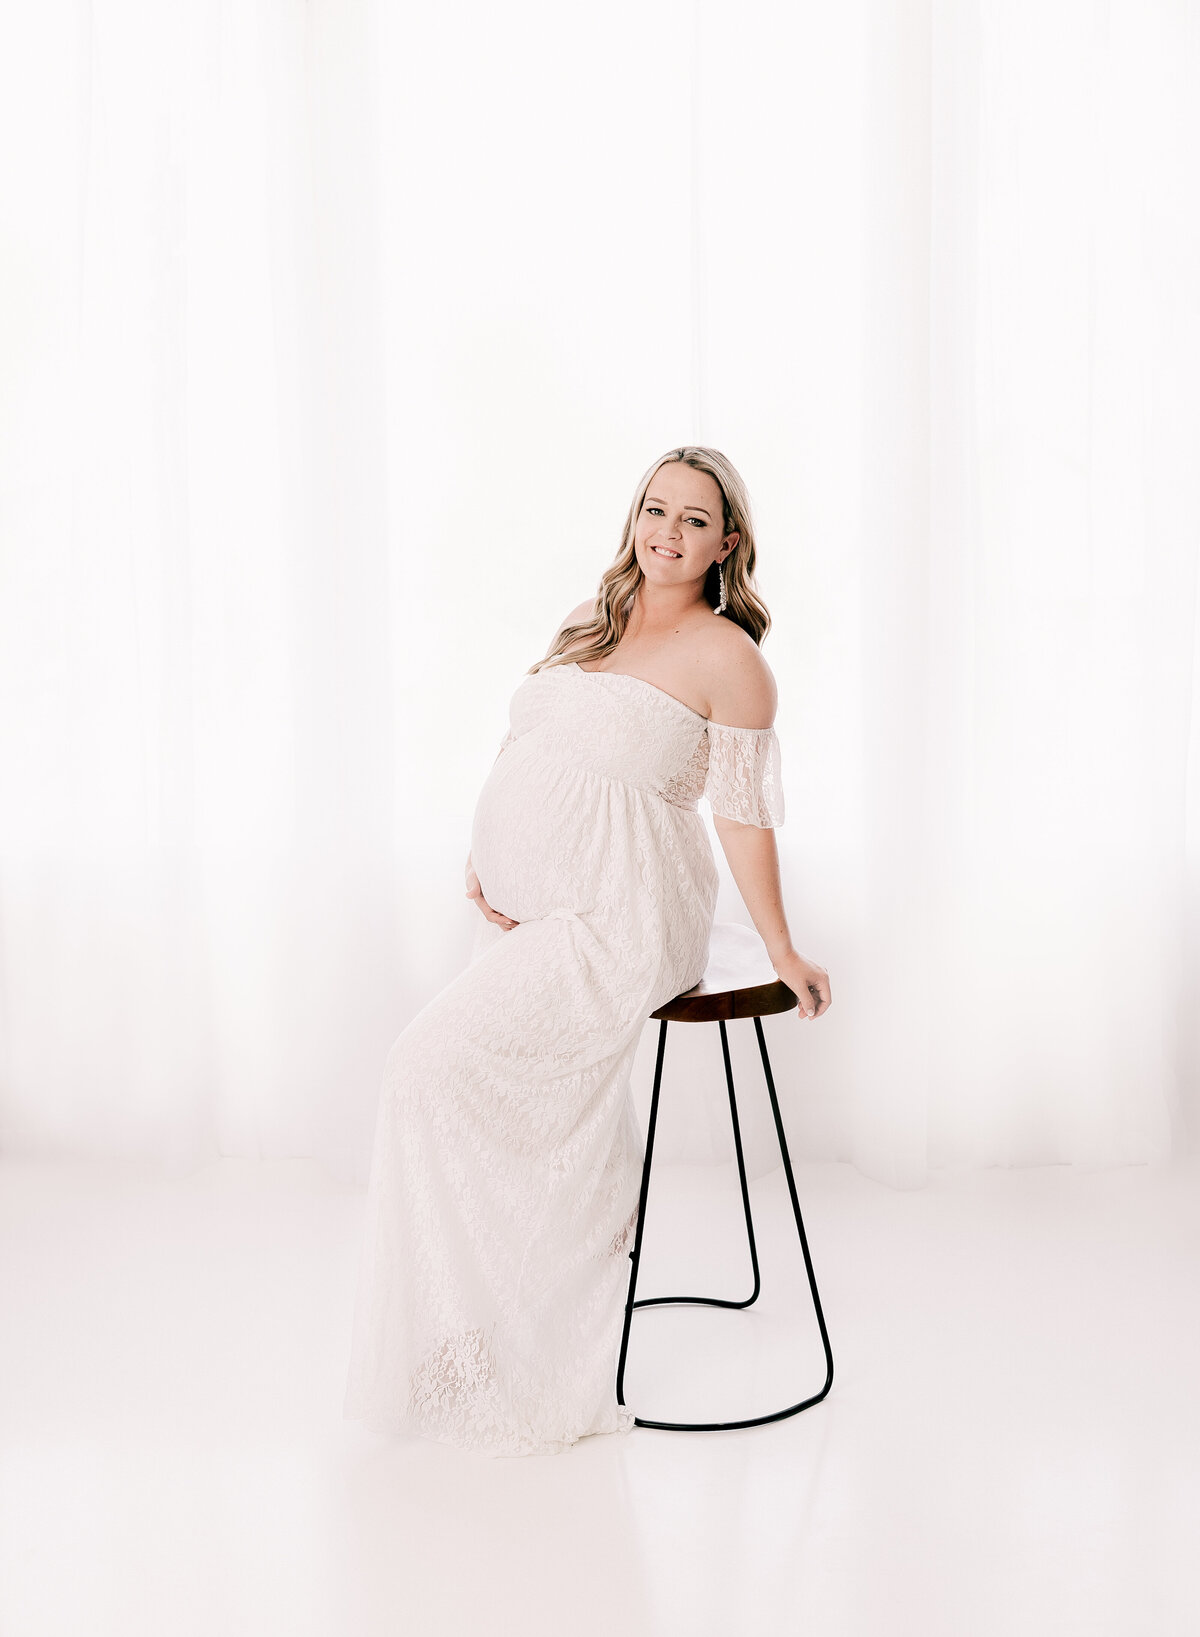 Expectant mom in a bright white maternity photo.